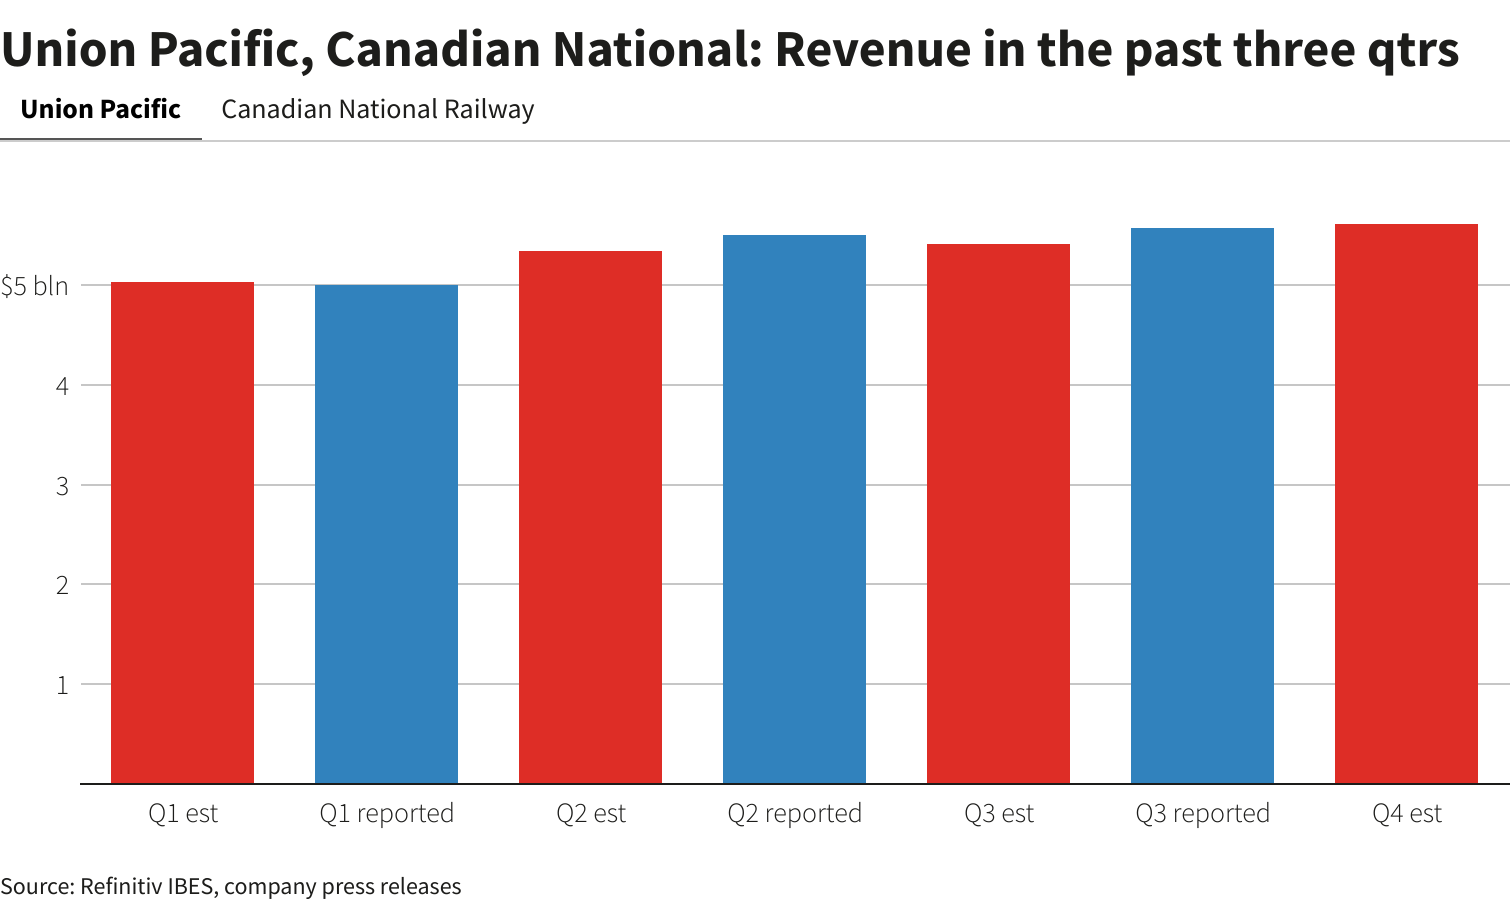 Union Pacific, Canadian National: Revenue in the past three qtrs <br>